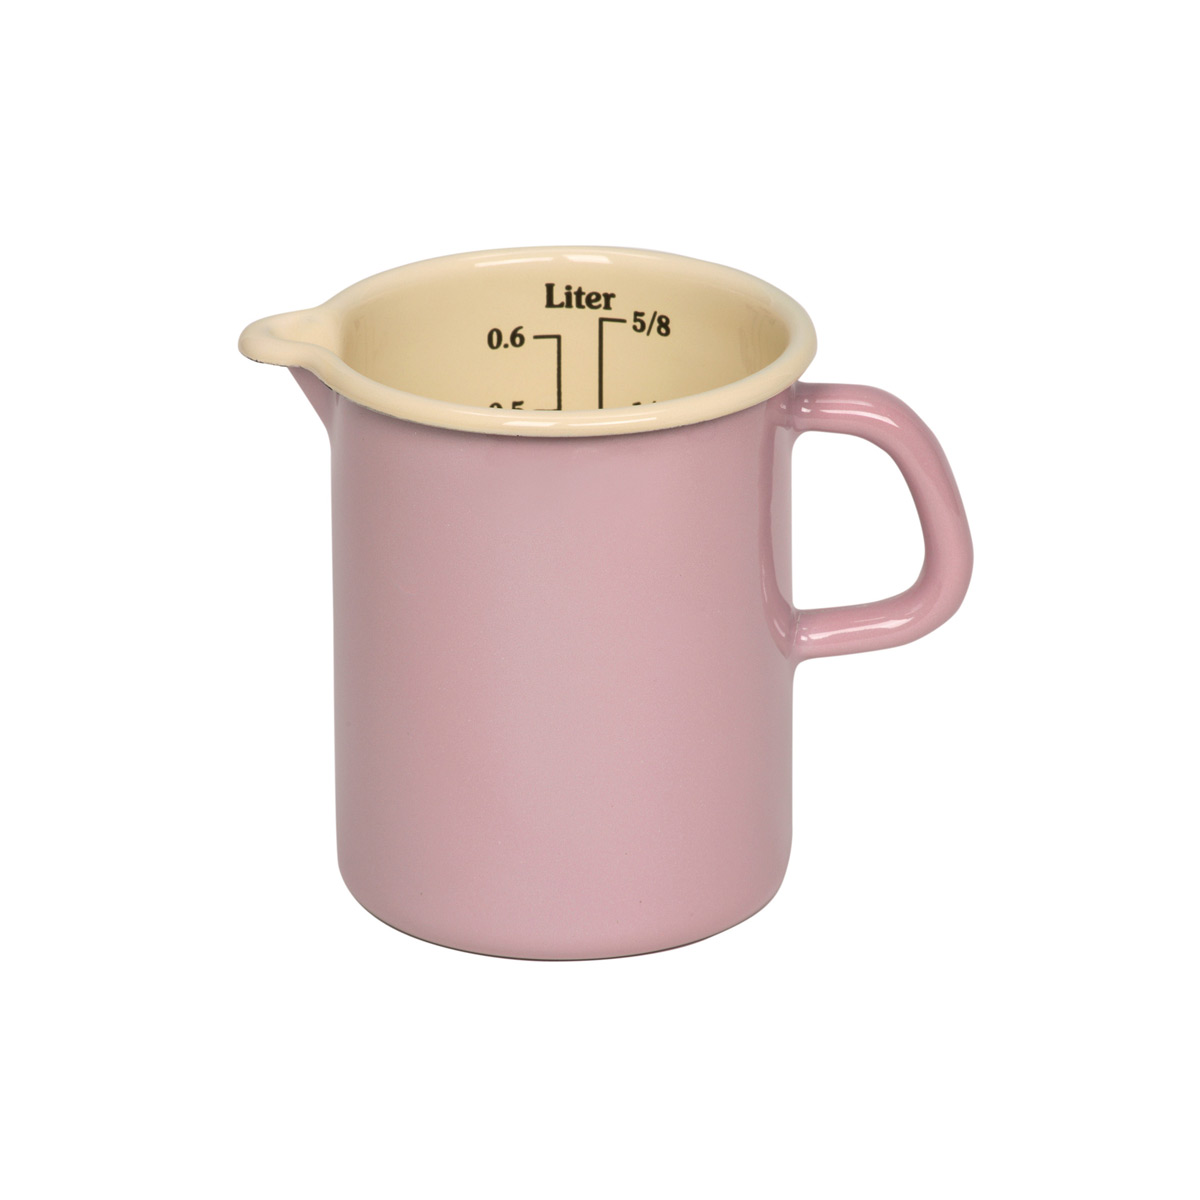 Riess Classic Bunt - Pastell Küchenmass Rosa 9 cm / 0,5 Ltr / aus Emaille